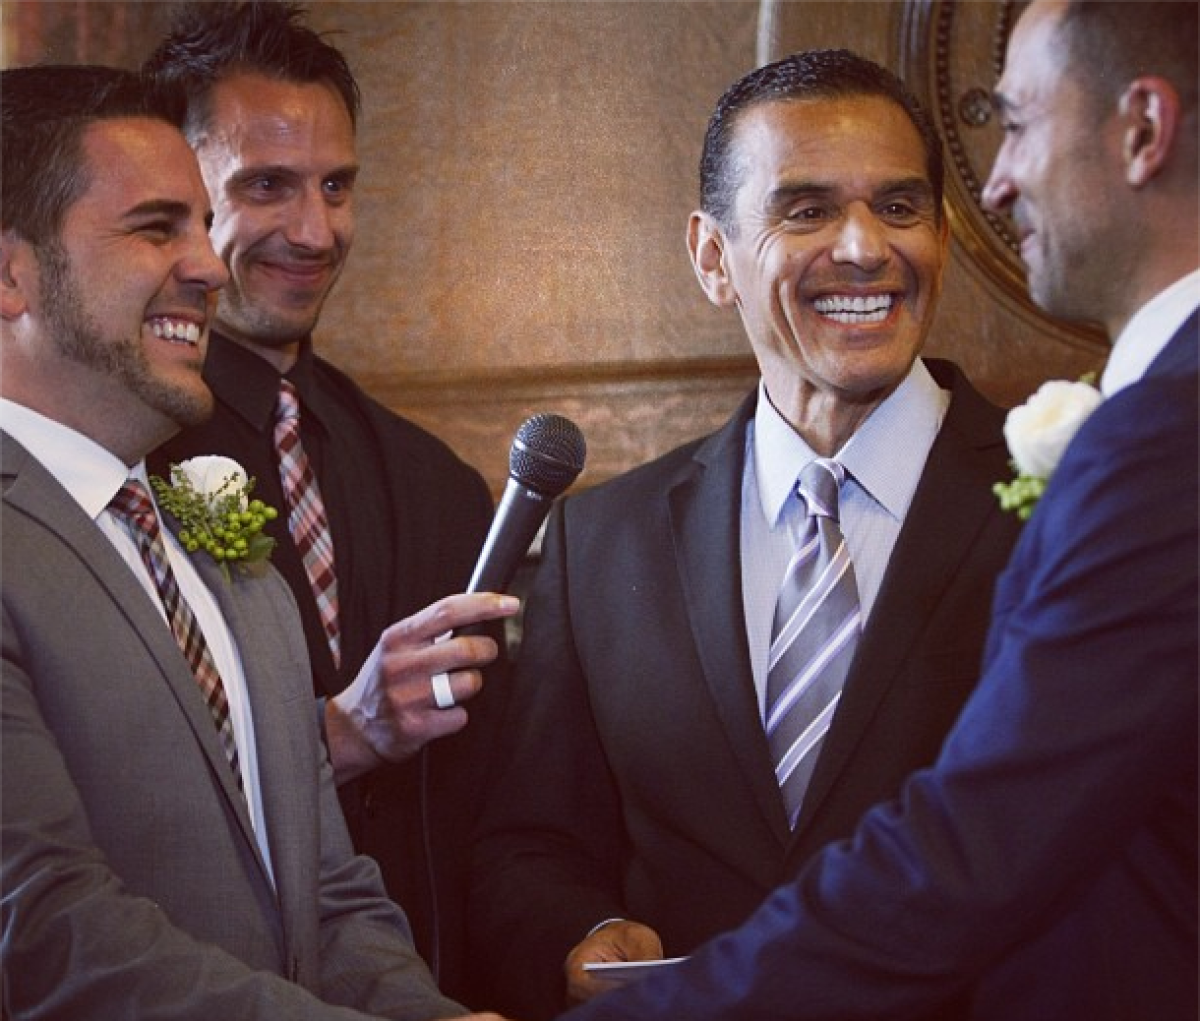 A little more than two hours after a federal court lifted an injunction on gay marriages Friday afternoon, Burbank couple Paul Katami and Jeff Zarrillo, who helped push Proposition 8 to the U.S. Supreme Court were officially married.